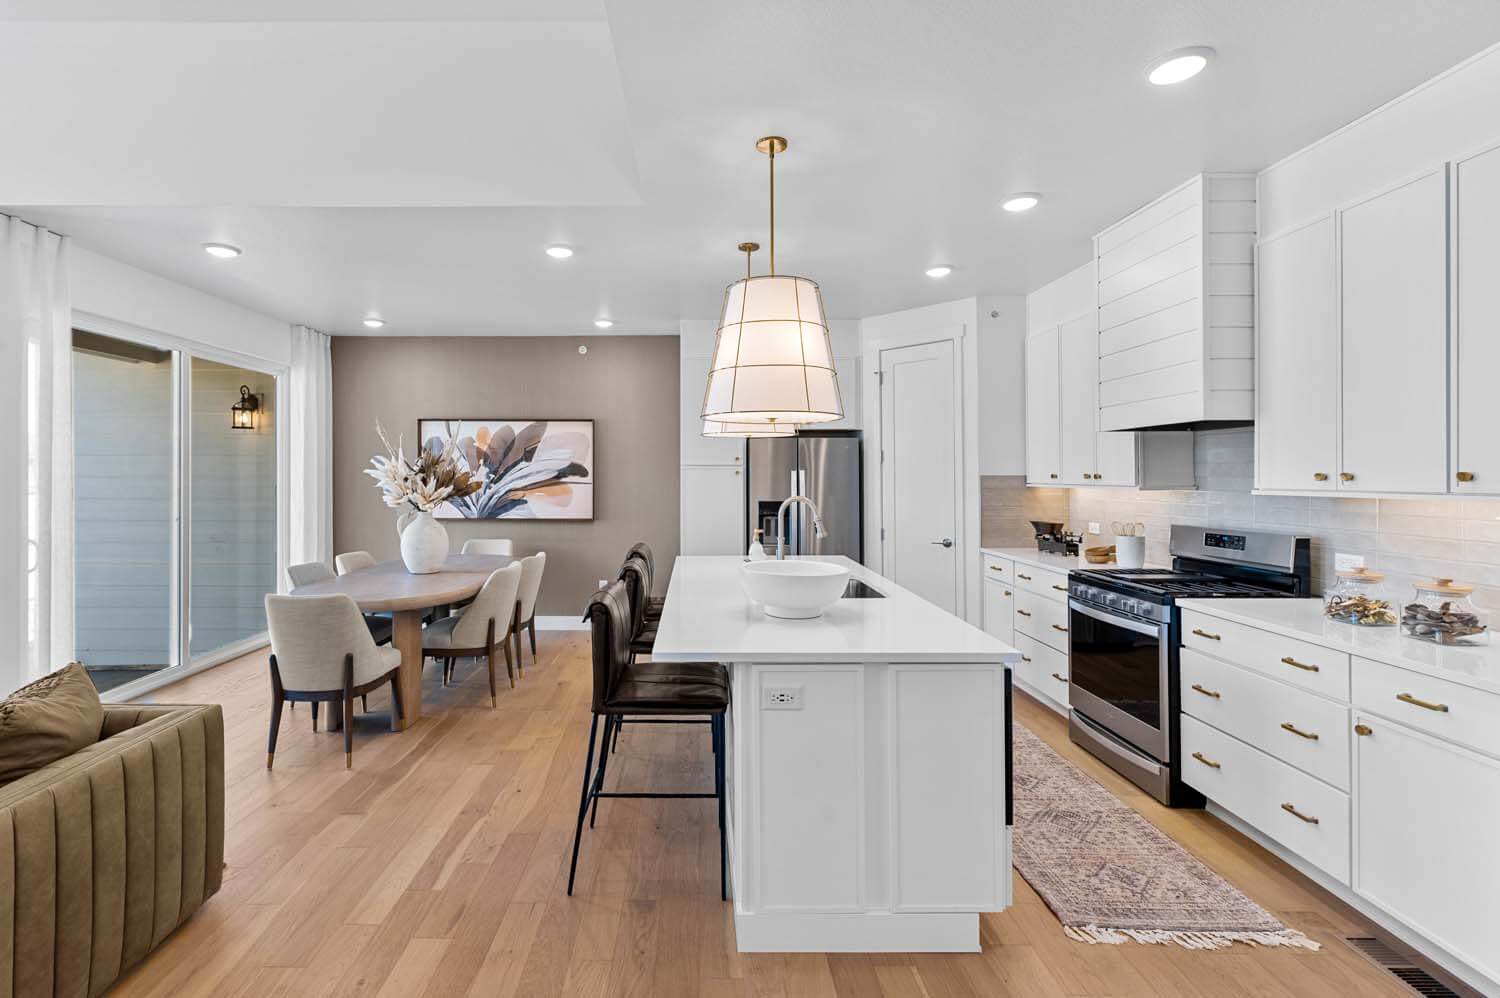 The long, white quartz island is between the dining area and the white kitchen cupboards and counters.